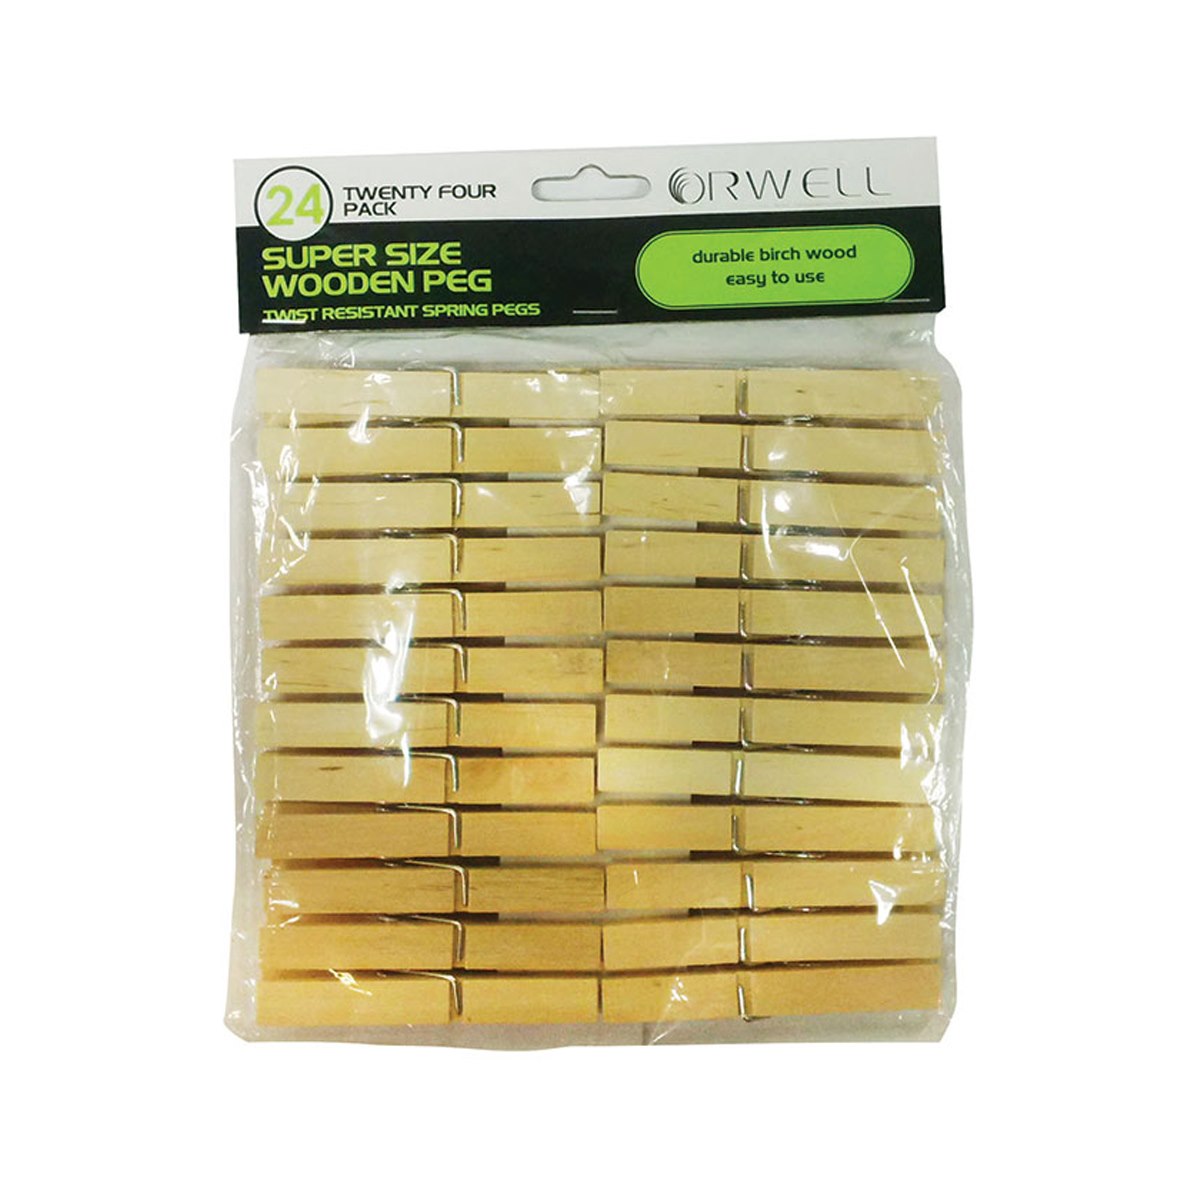 Orwell Super Size Wooden Pegs 24 Pack